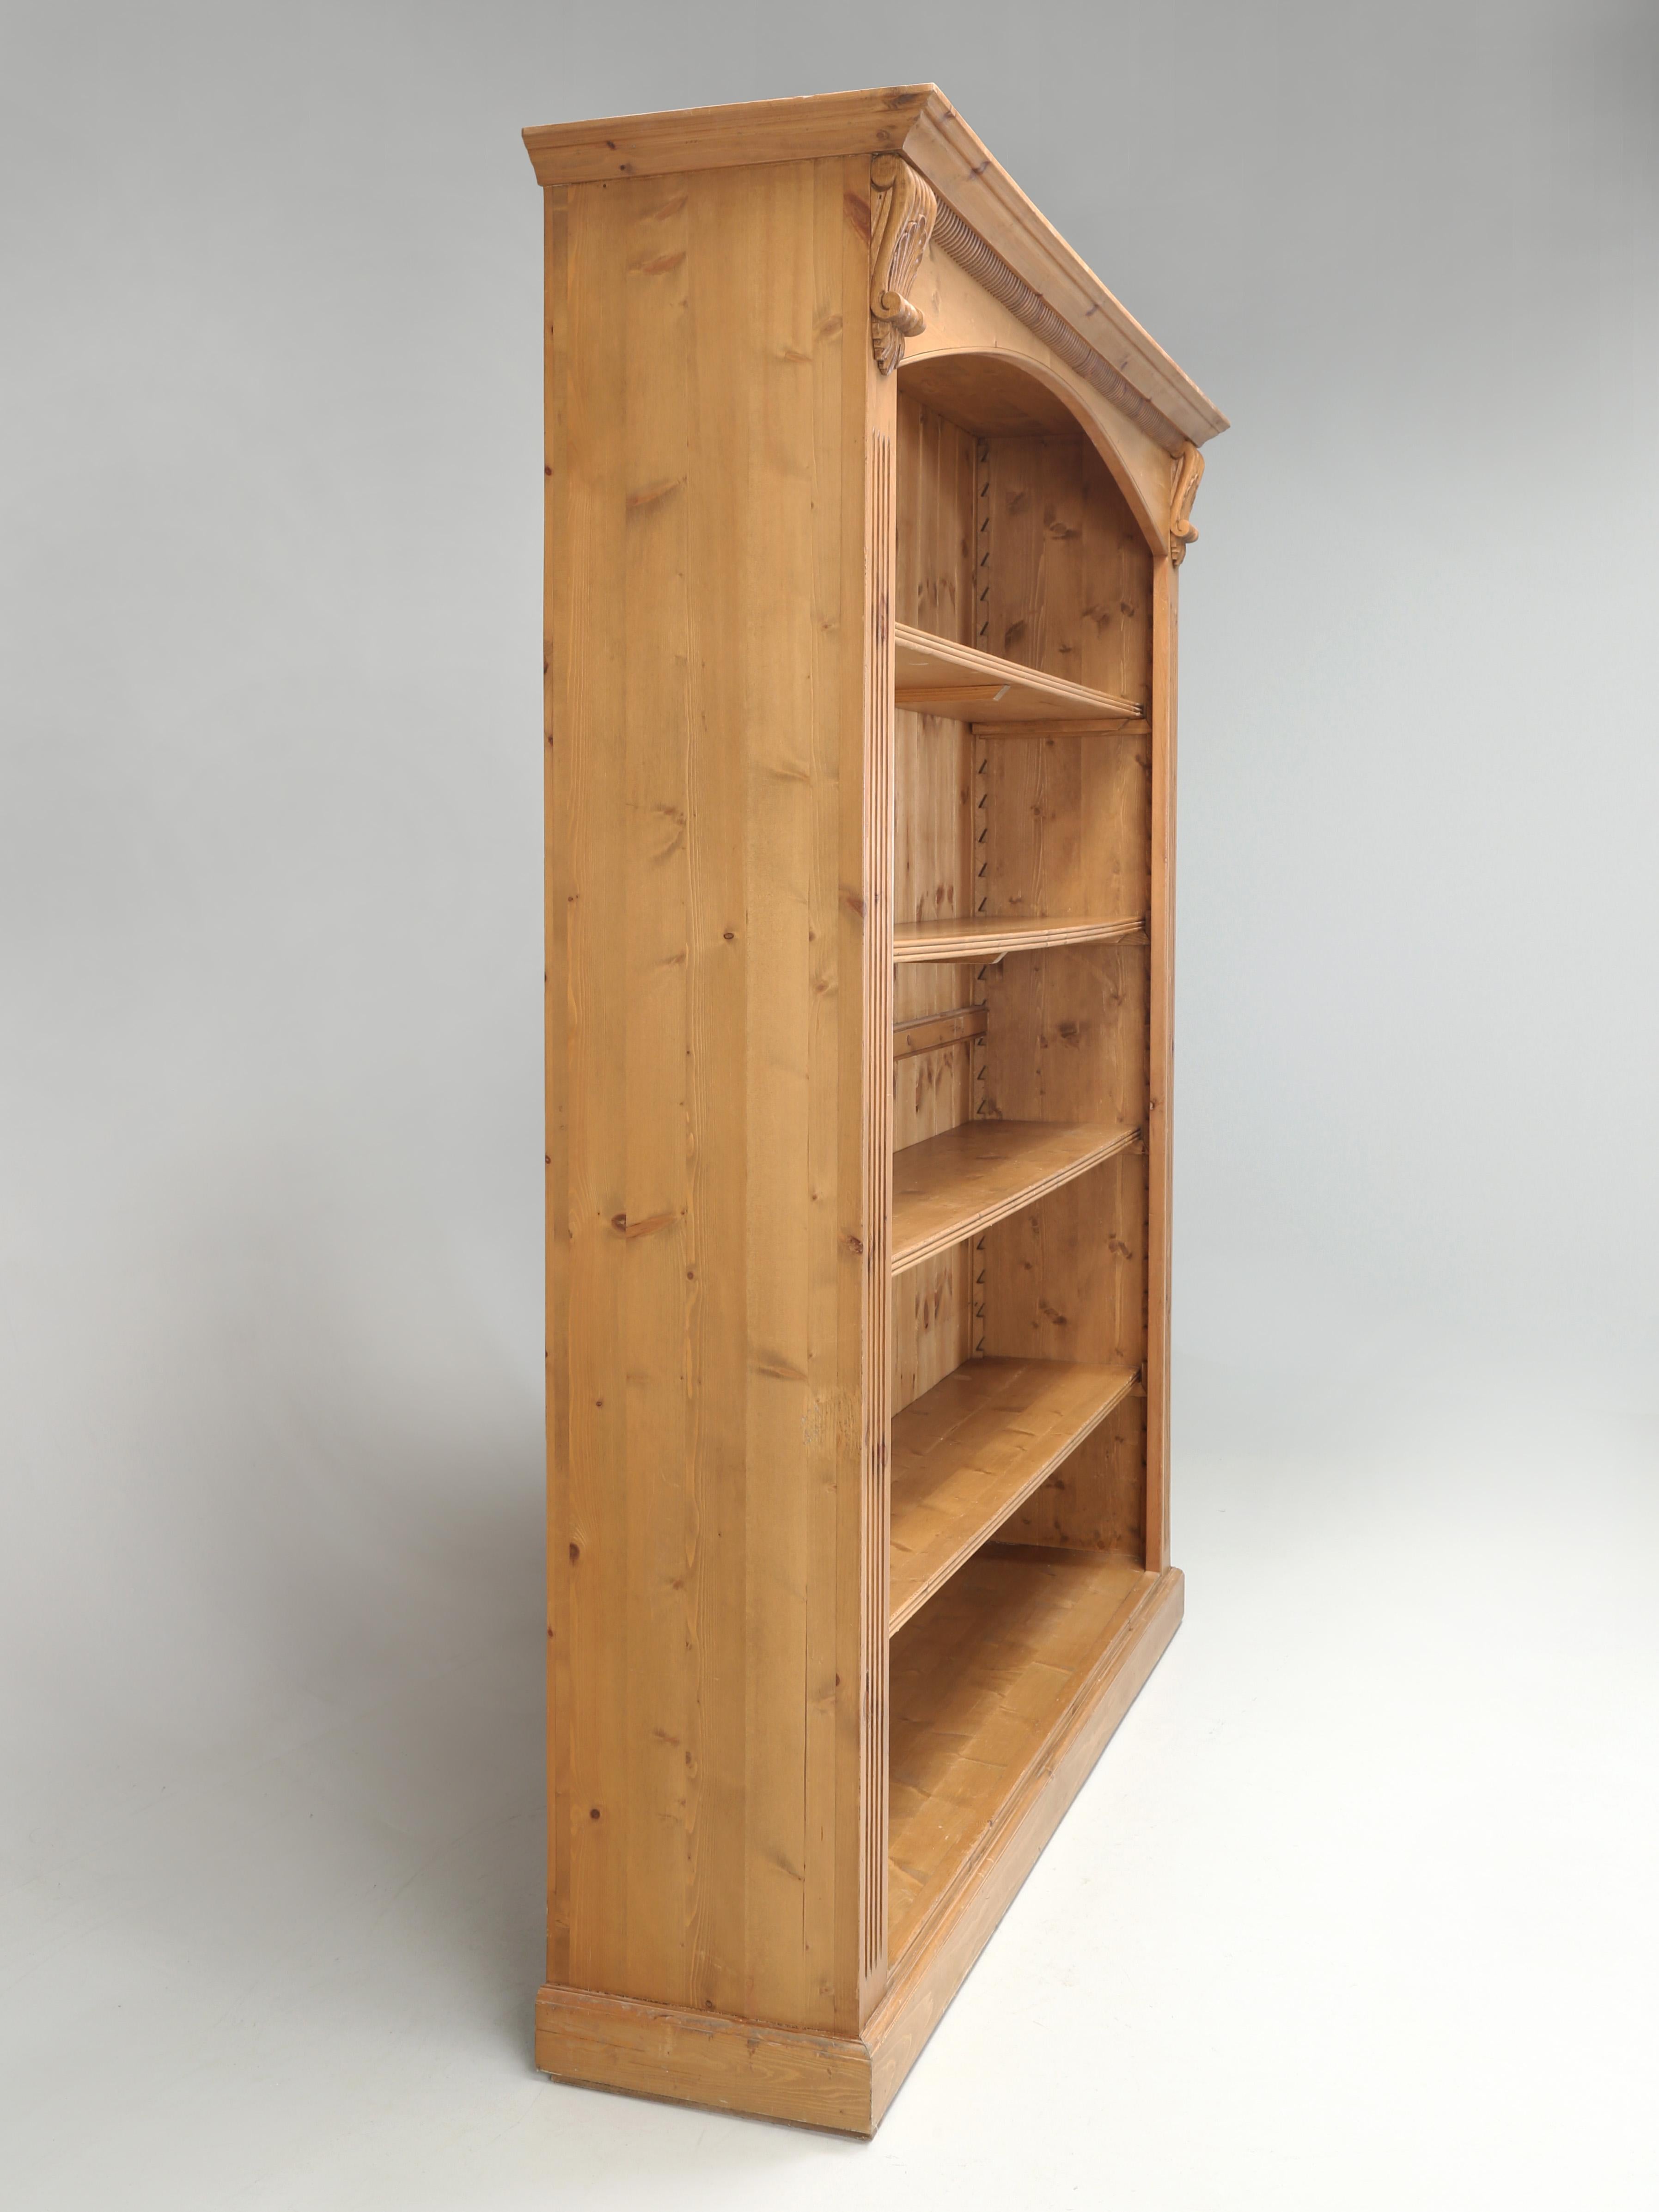 Country English Pine Bookcase Exceptionally Wide, Traditional Beeswax Finish by Chrispyn For Sale